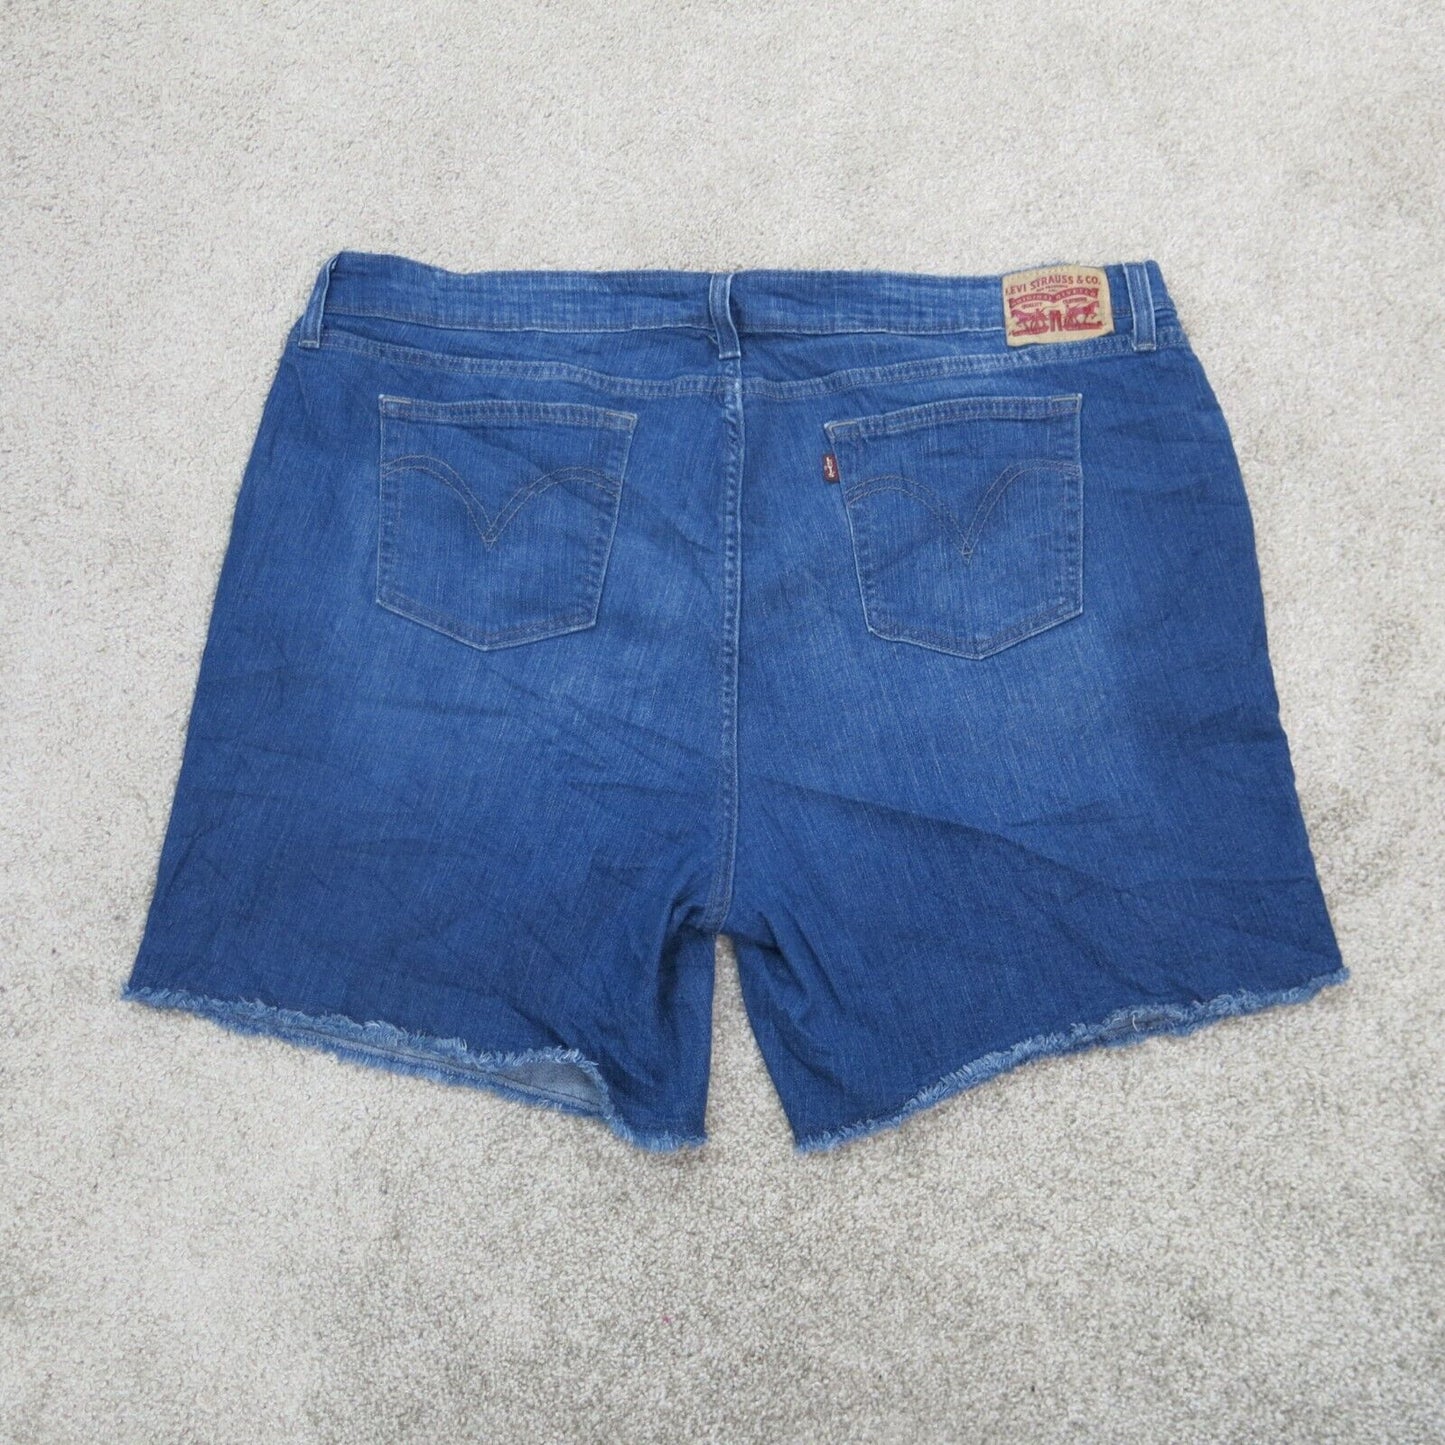 Levis Womens Cut Off Jeans Shorts High Rise Flat Front Pull On Blue Size W24